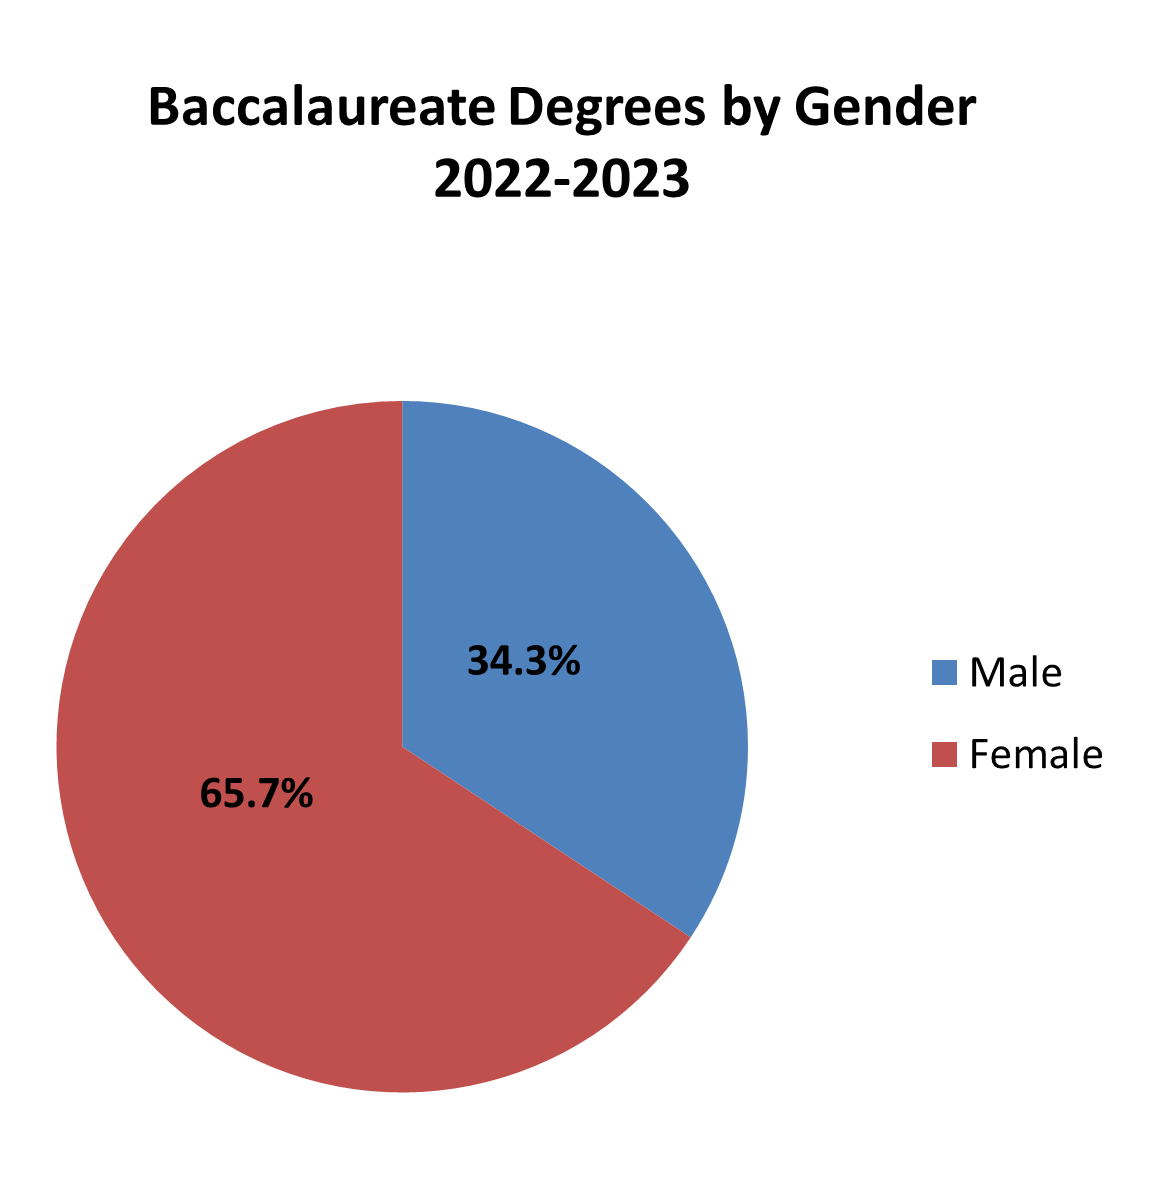 Baccalaureate Degrees by Gender pie chart